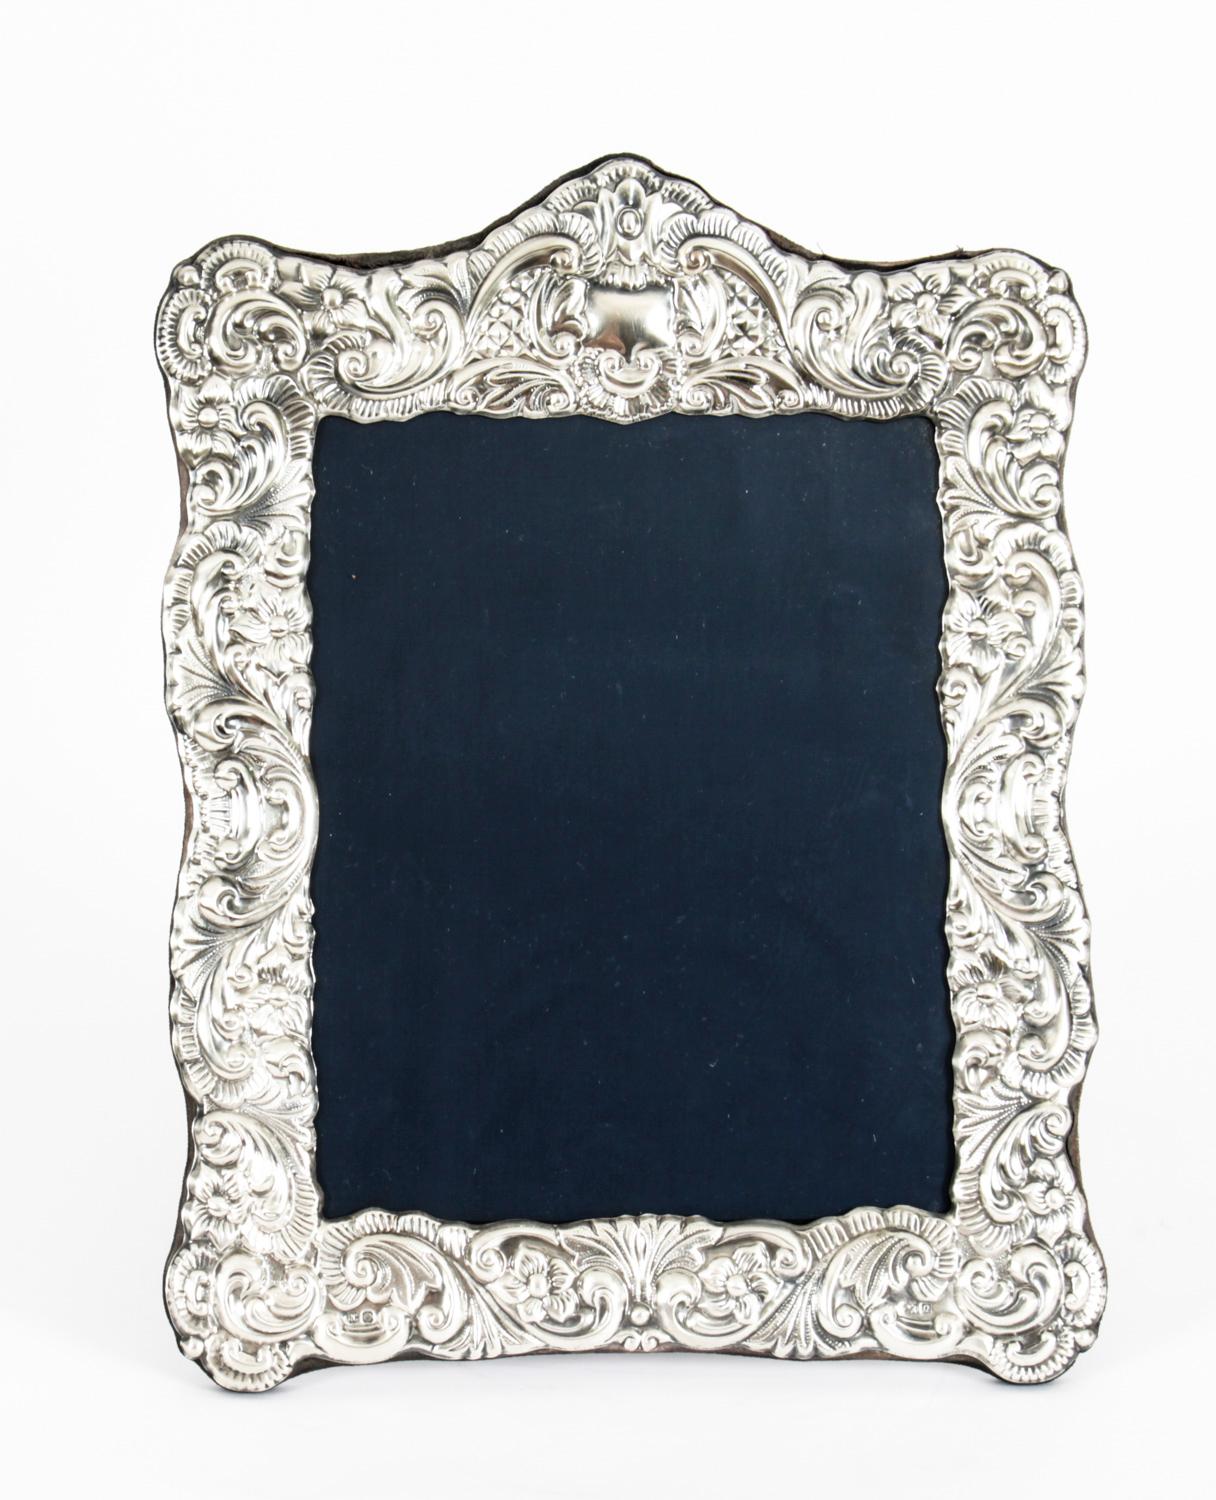 A large truly superb elegant large sterling silver photo frame by Carrs of Sheffield with hall marks for 1990.

The vertical frame has a black velvet back with rectangular border decorated with garlands and swags and features an easel back. 

An